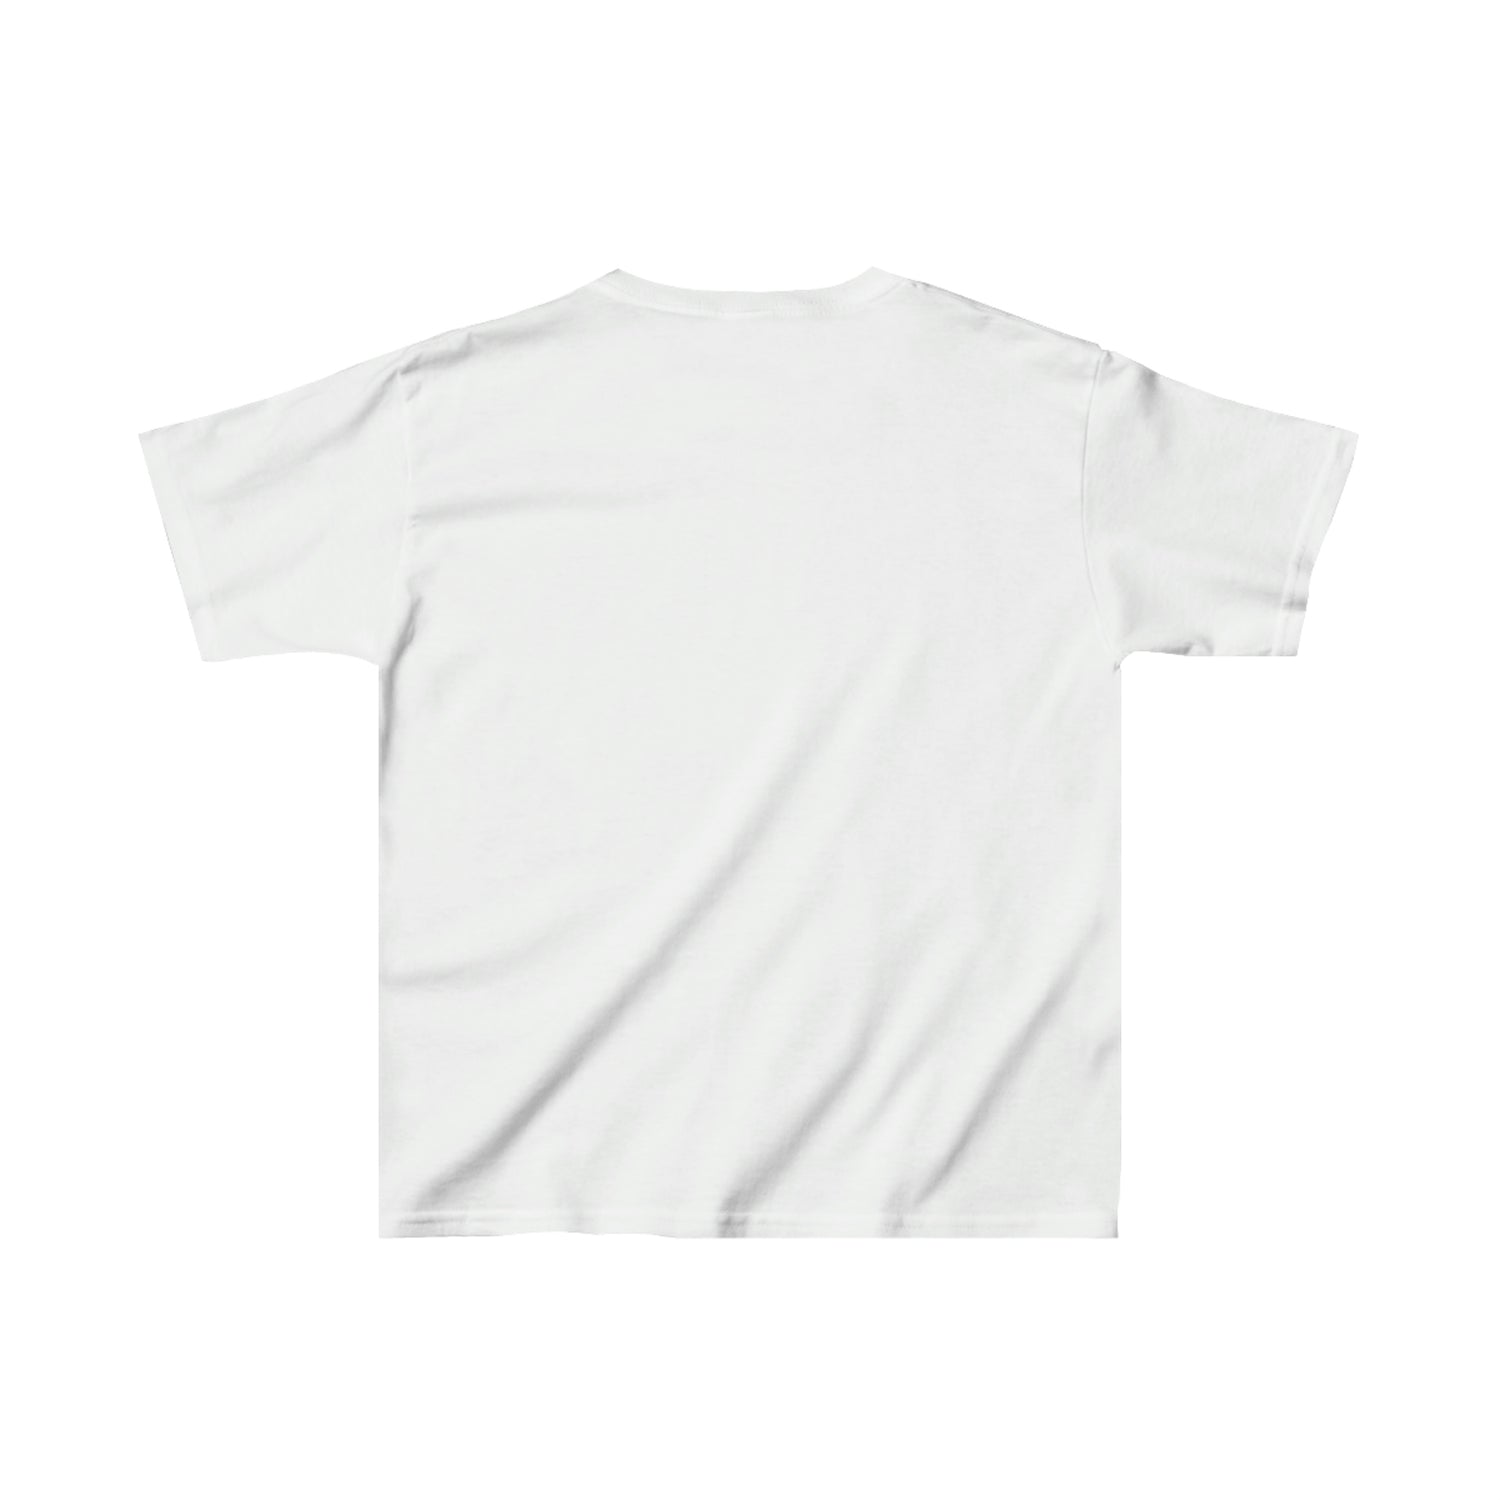 Great Throw - Kids Cotton Tee - Fry1Productions